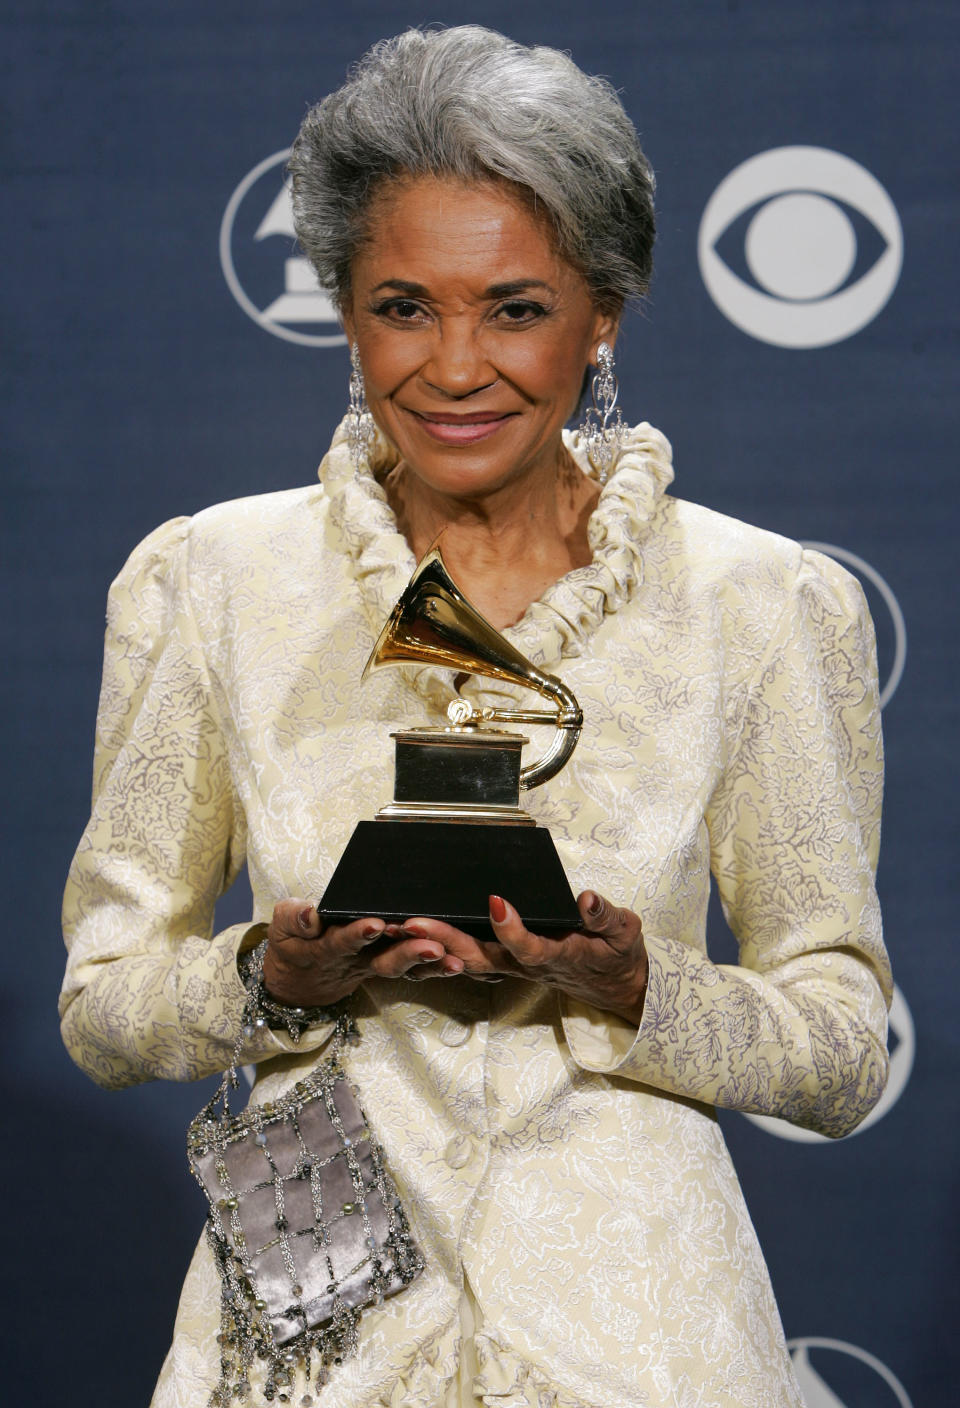 FILE - In this Feb. 13, 2005 file photo, Nancy Wilson poses with her award for best jazz vocal album for "R.S.V.P. (Rare Songs, Very Personal)" at the 47th Annual Grammy Awards in Los Angeles. Grammy-winning jazz and pop singer Wilson has died at age 81. Her manager Devra Hall Levy tells The Associated Press late Thursday night, Dec. 13, 2018, that Wilson died peacefully after a long illness at her home in Pioneertown, a California desert community near Joshua Tree National Park. (AP Photo/Reed Saxon, File)